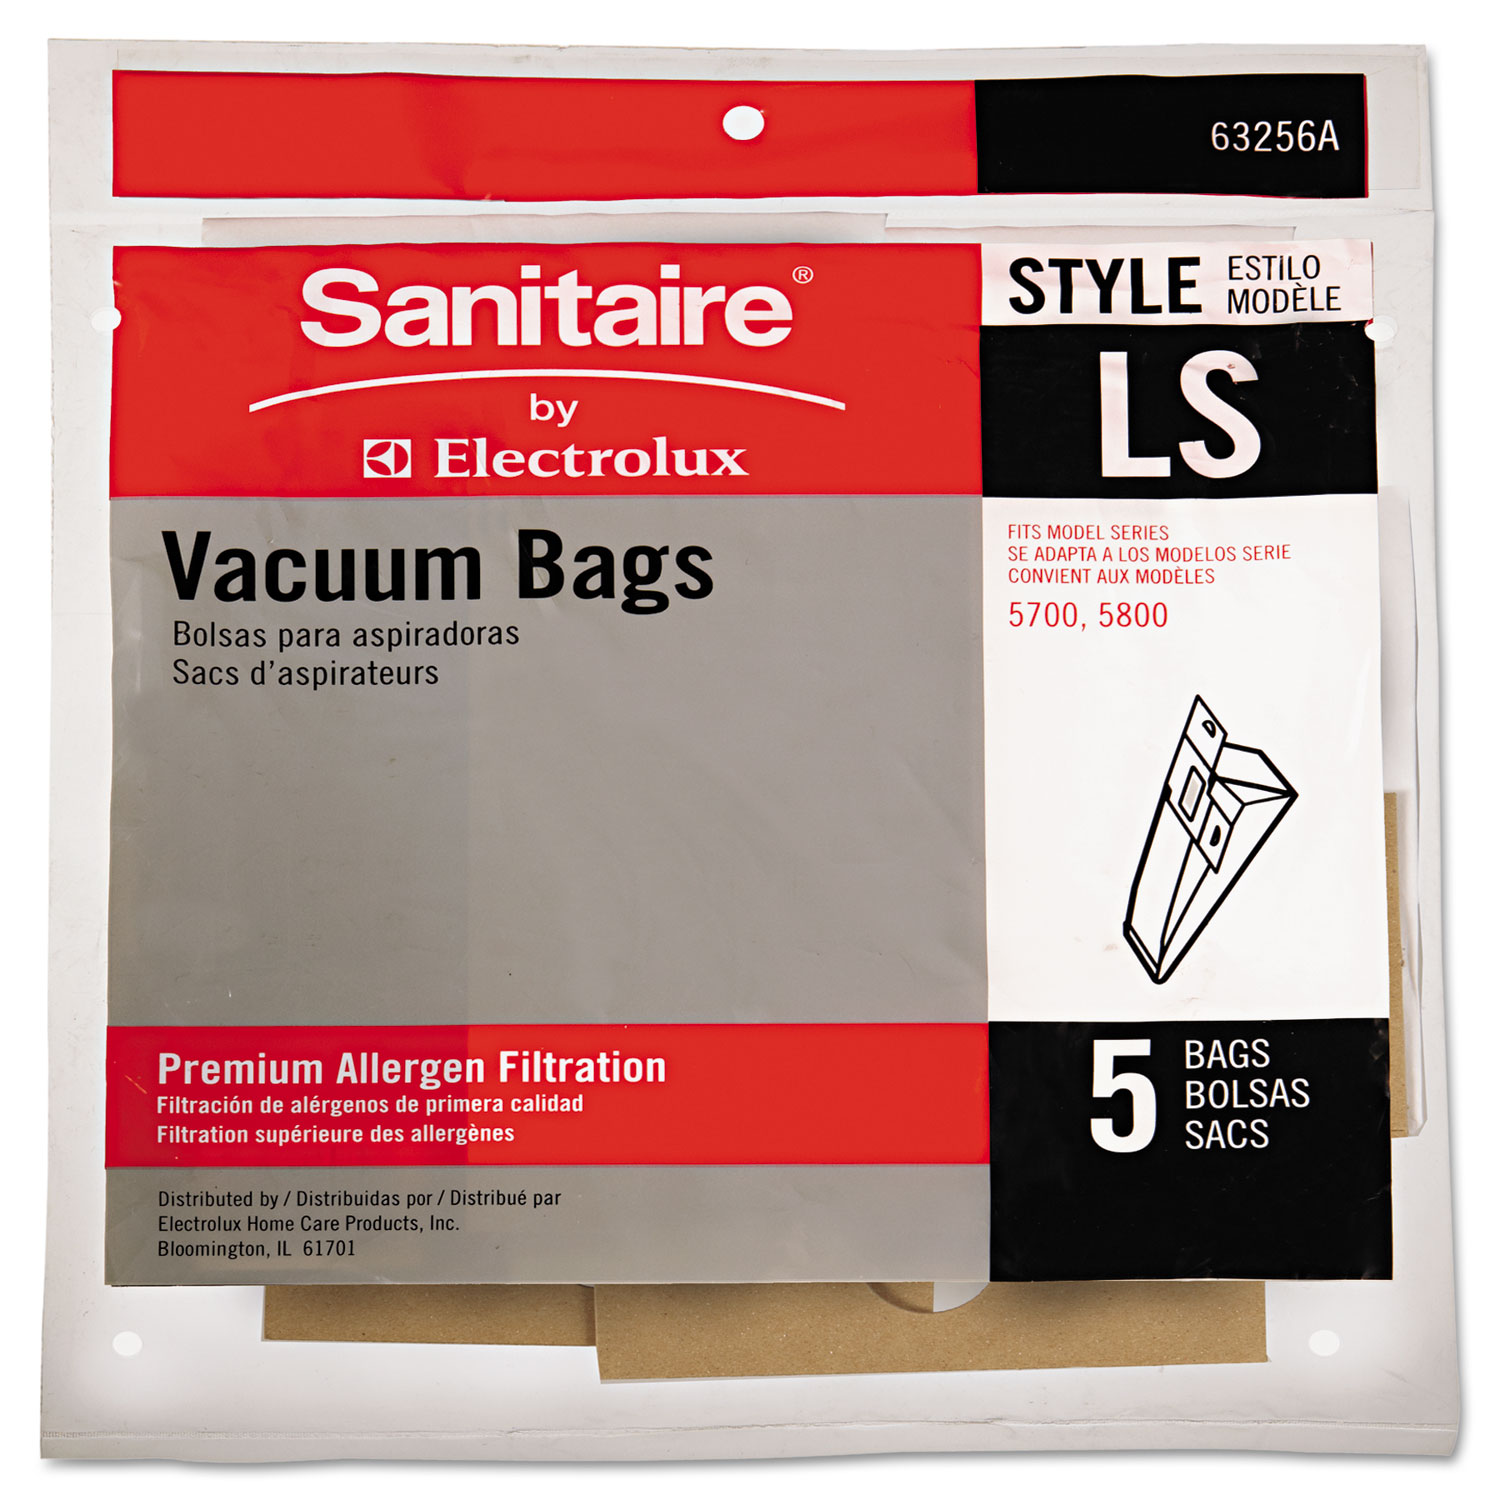  Sanitaire EUR 63256A10CT Commercial Upright Vacuum Cleaner Replacement Bags, Style LS, 5/Pack, 10 PK/CT (EUR63256A10CT) 